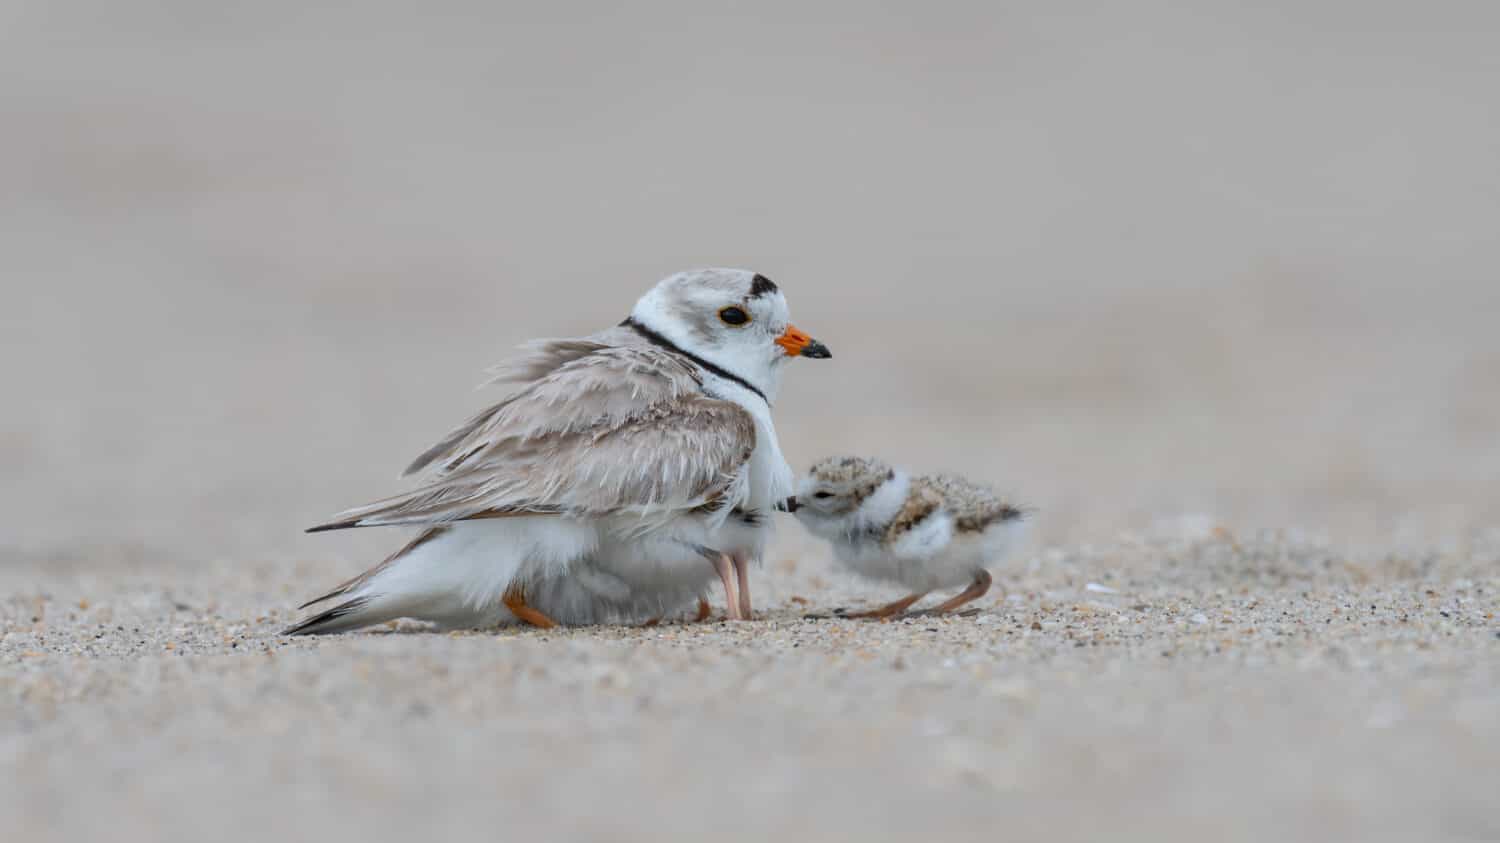 A Piping Plover provides shelter for her hatchlings.